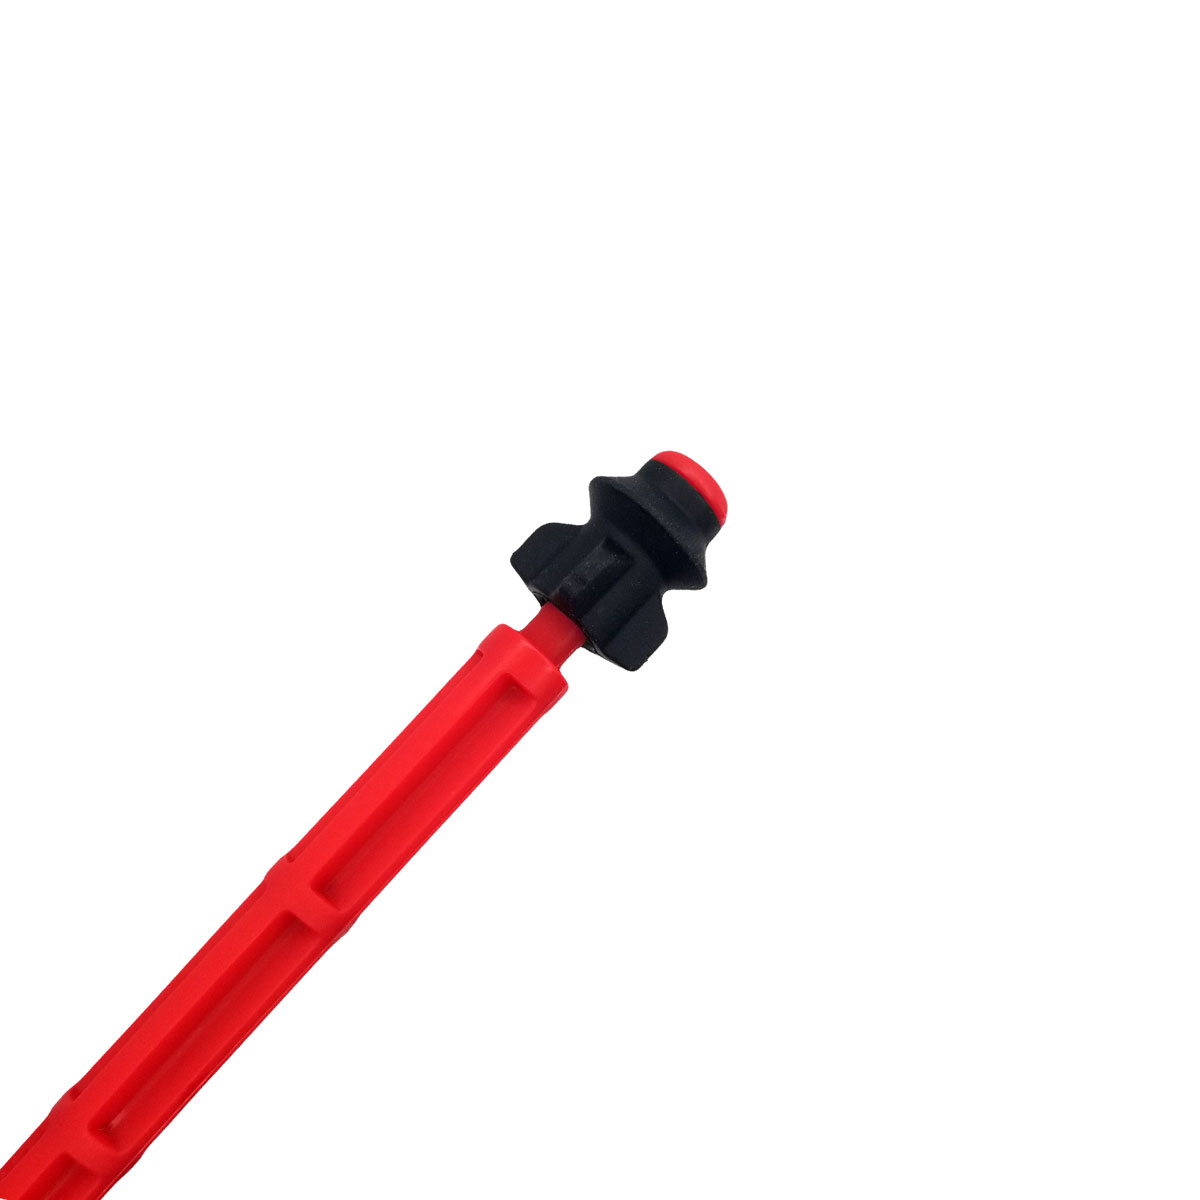 Exalt Barrel Maid Swab Squeegee Paintball Squeegie Stick Folding MAGMA Red Black for sale online 